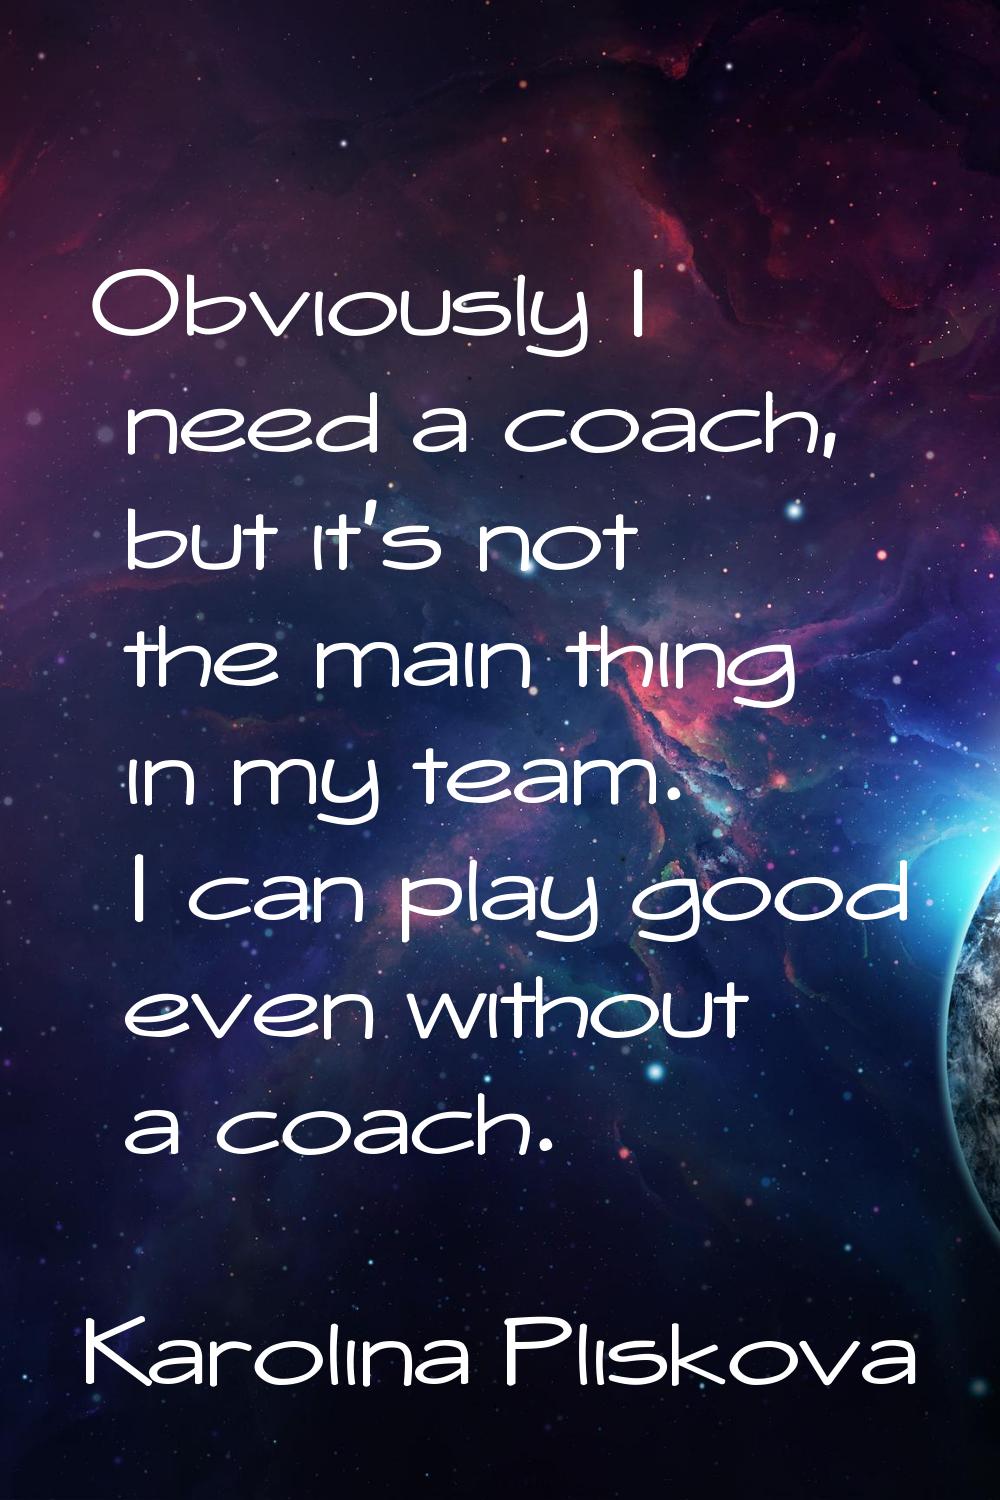 Obviously I need a coach, but it's not the main thing in my team. I can play good even without a co